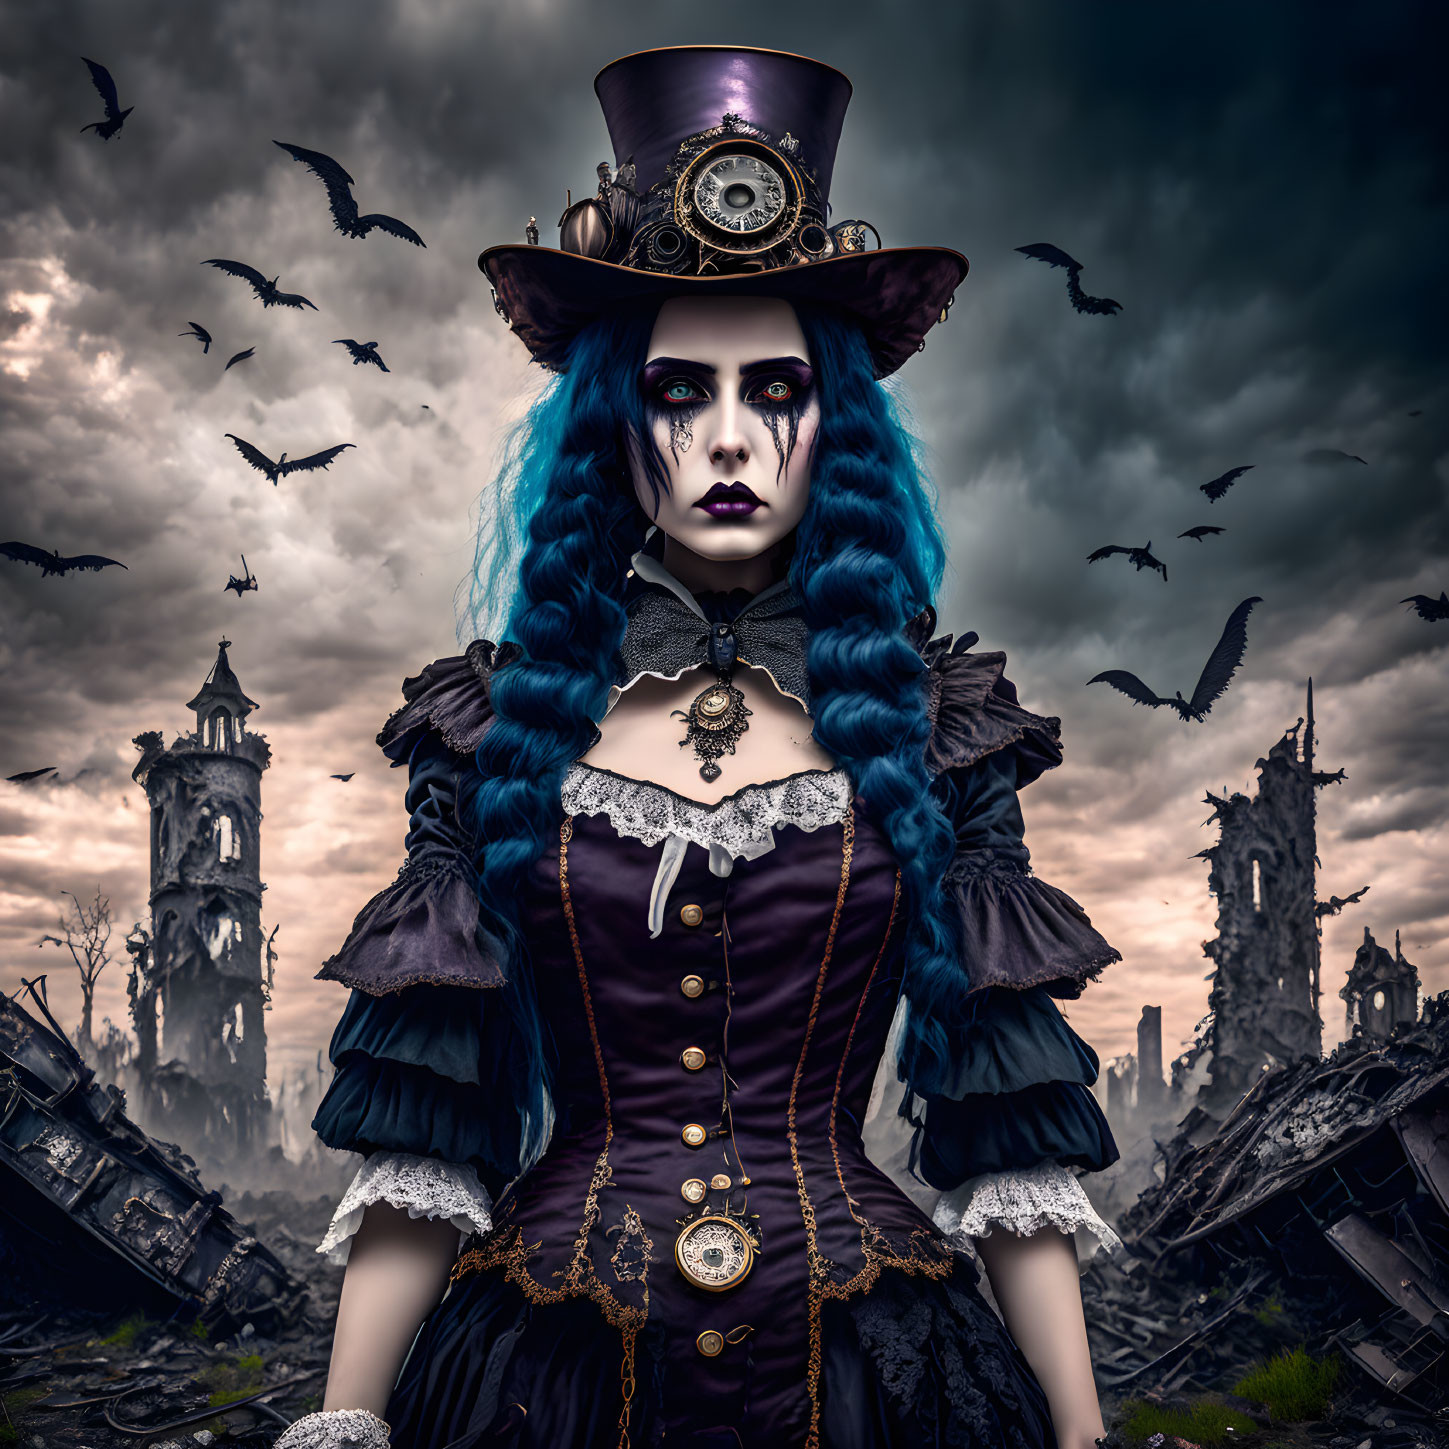 Gothic Victorian woman with blue hair and top hat in eerie setting